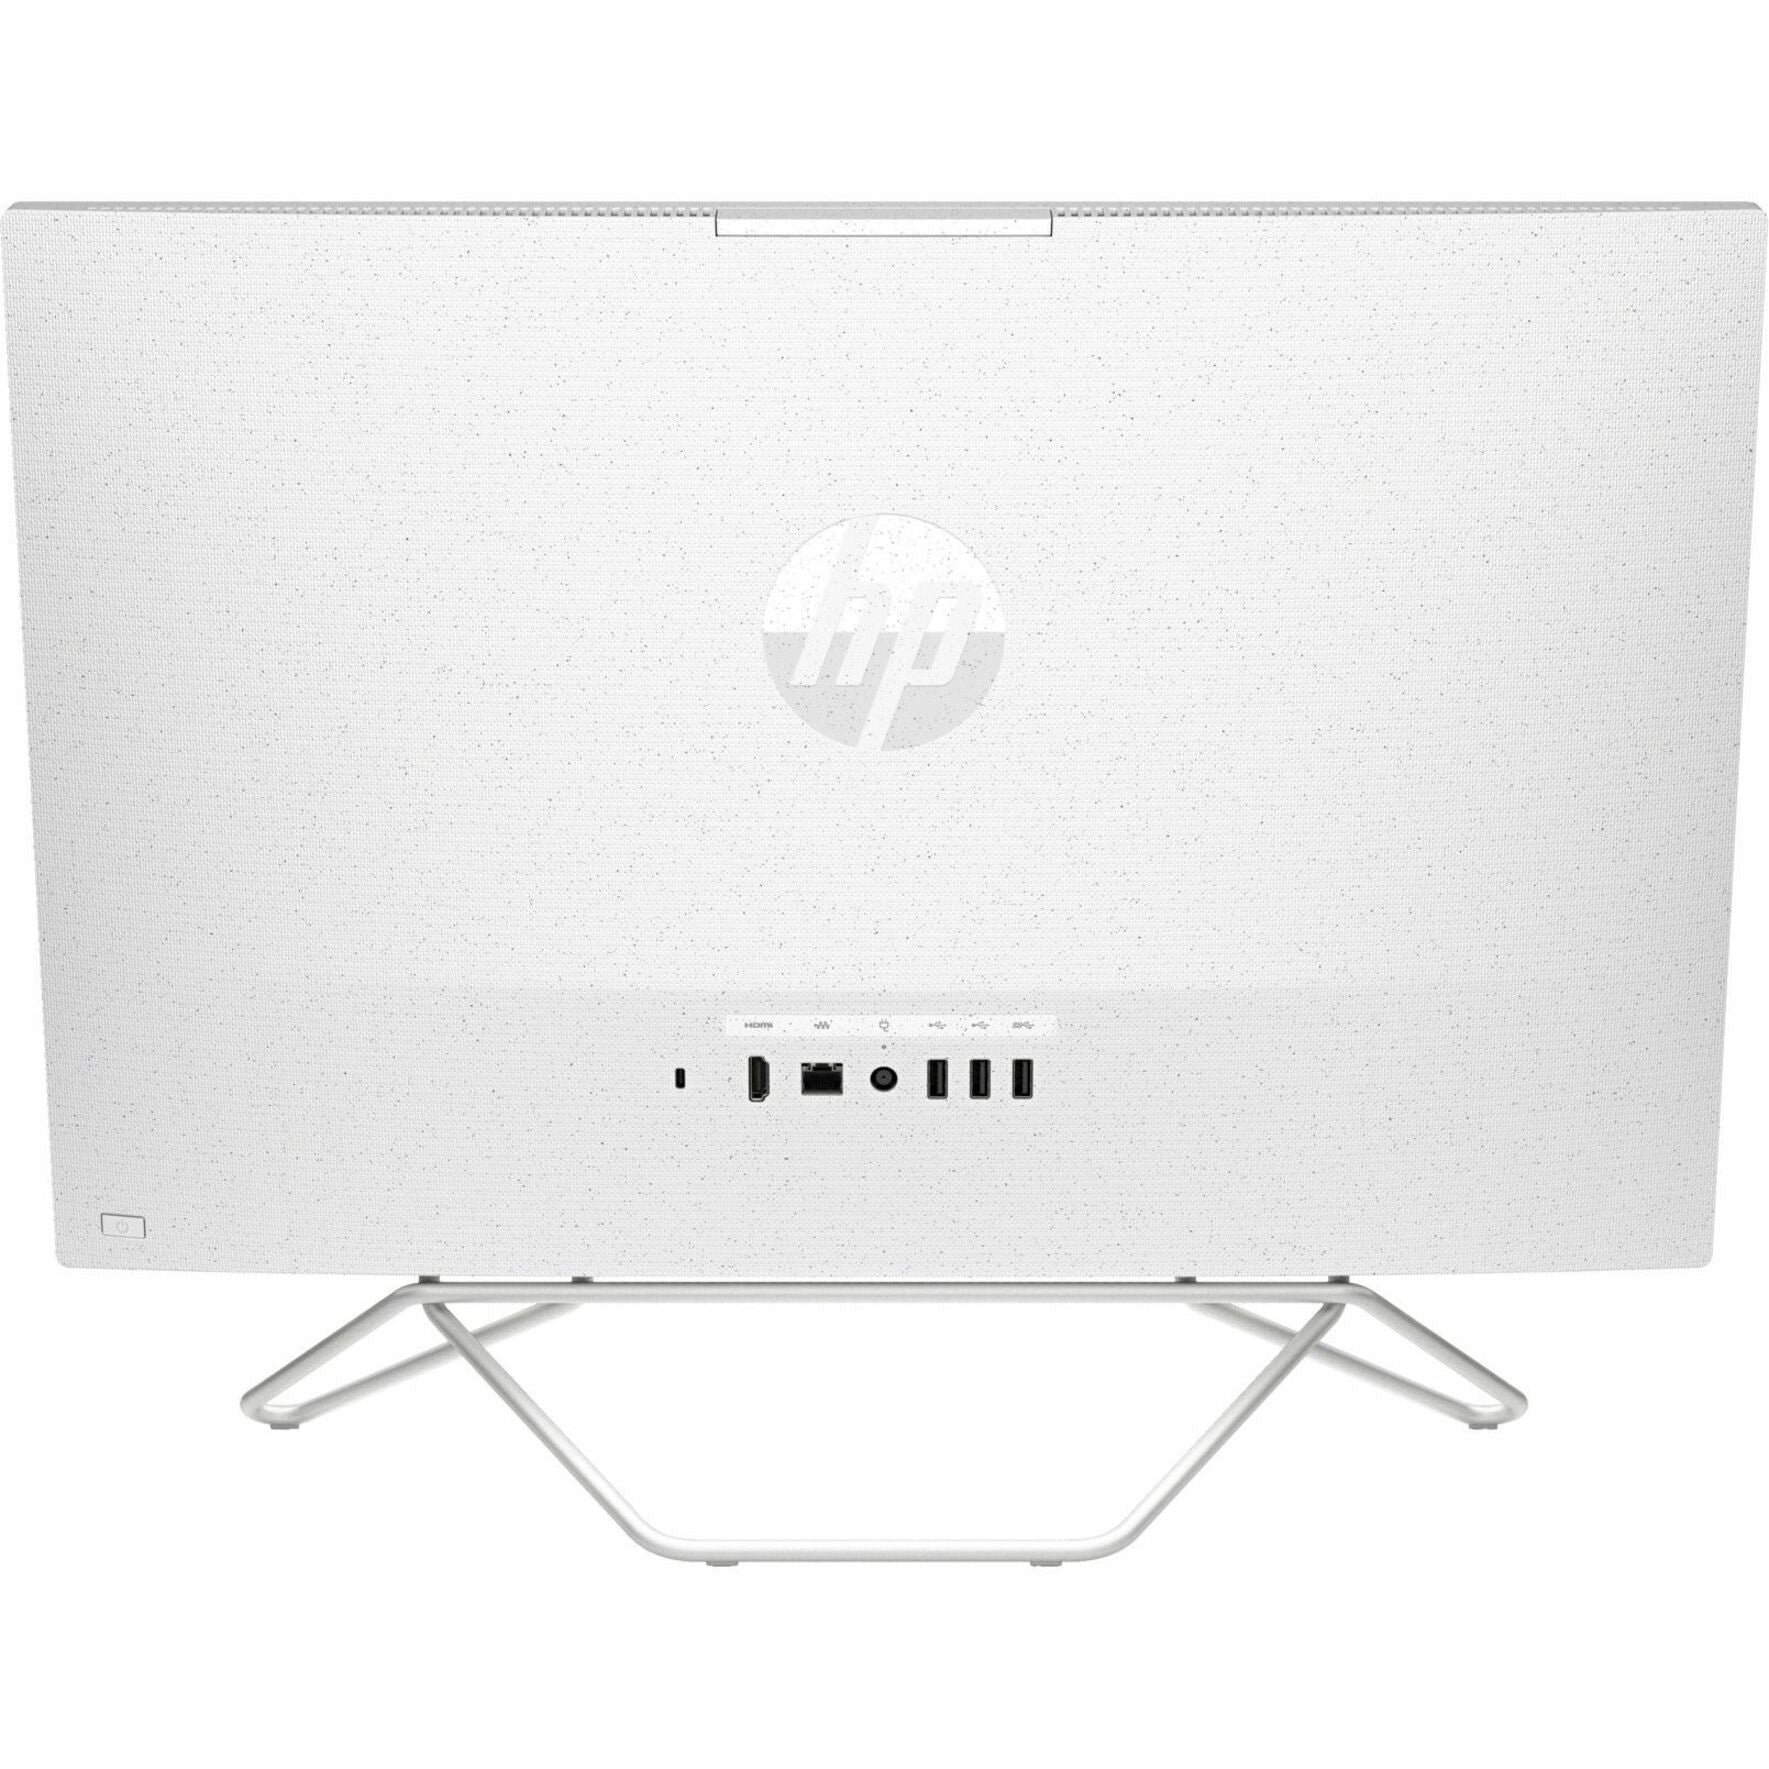 HP All-in-One 24-cb0062ds Bundle All-in-One PC, Windows 11 Home, Intel UHD Graphics 605 DDR4 SDRAM, 8GB Memory, 256GB SSD